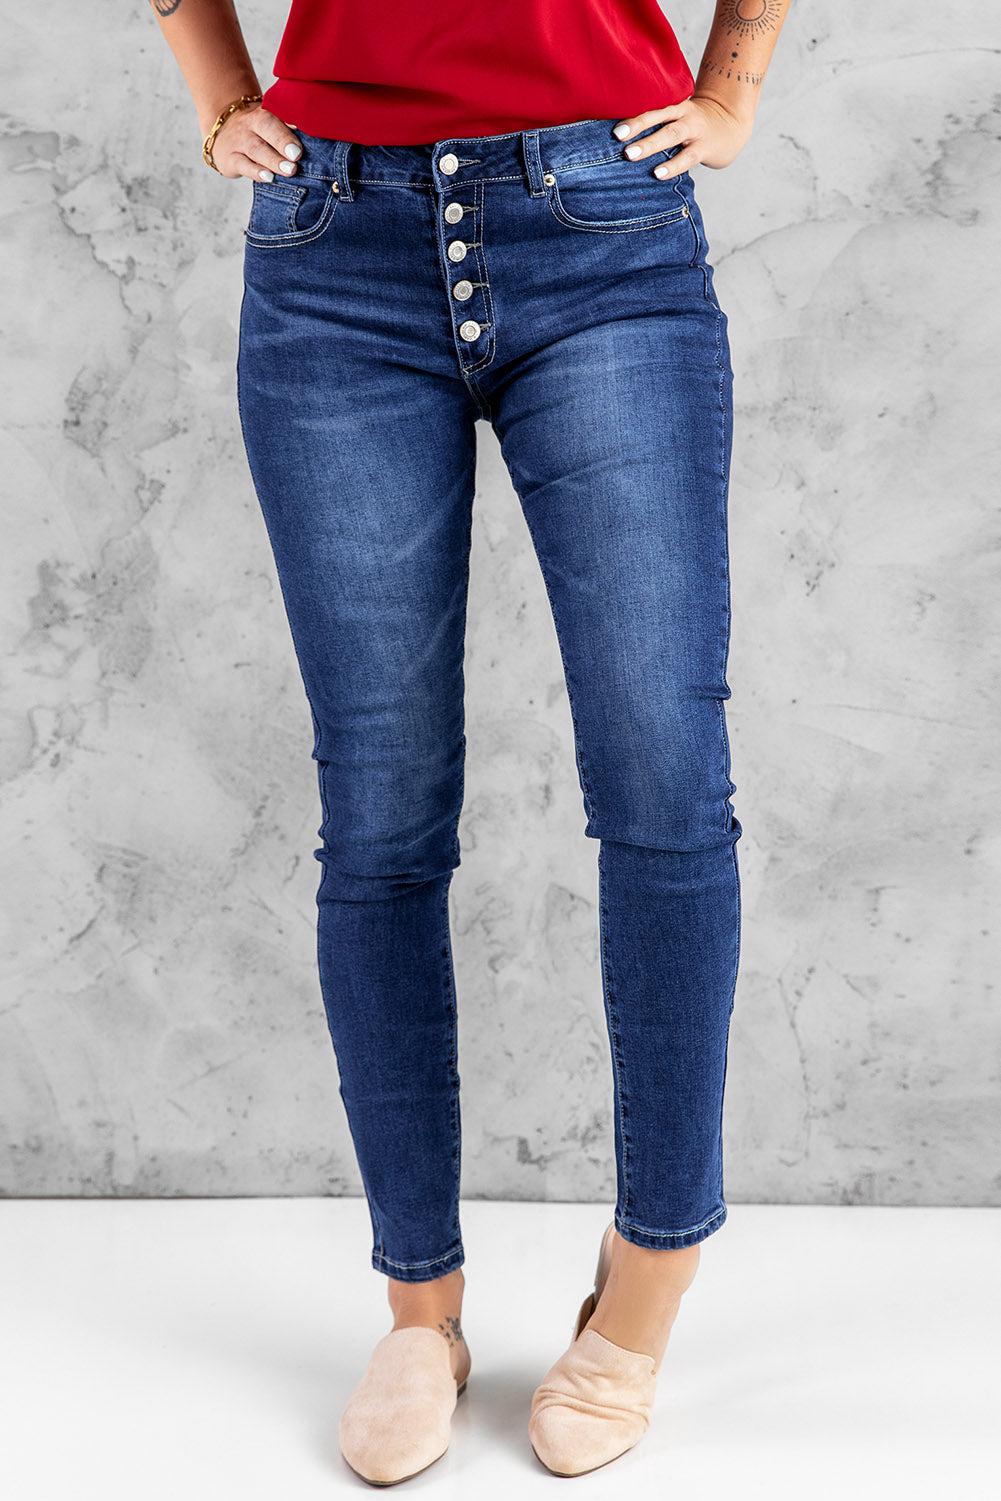 What You Want Button Fly Pocket Jeans-JEANS 0-16-[Adult]-[Female]-Medium-S-2022 Online Blue Zone Planet